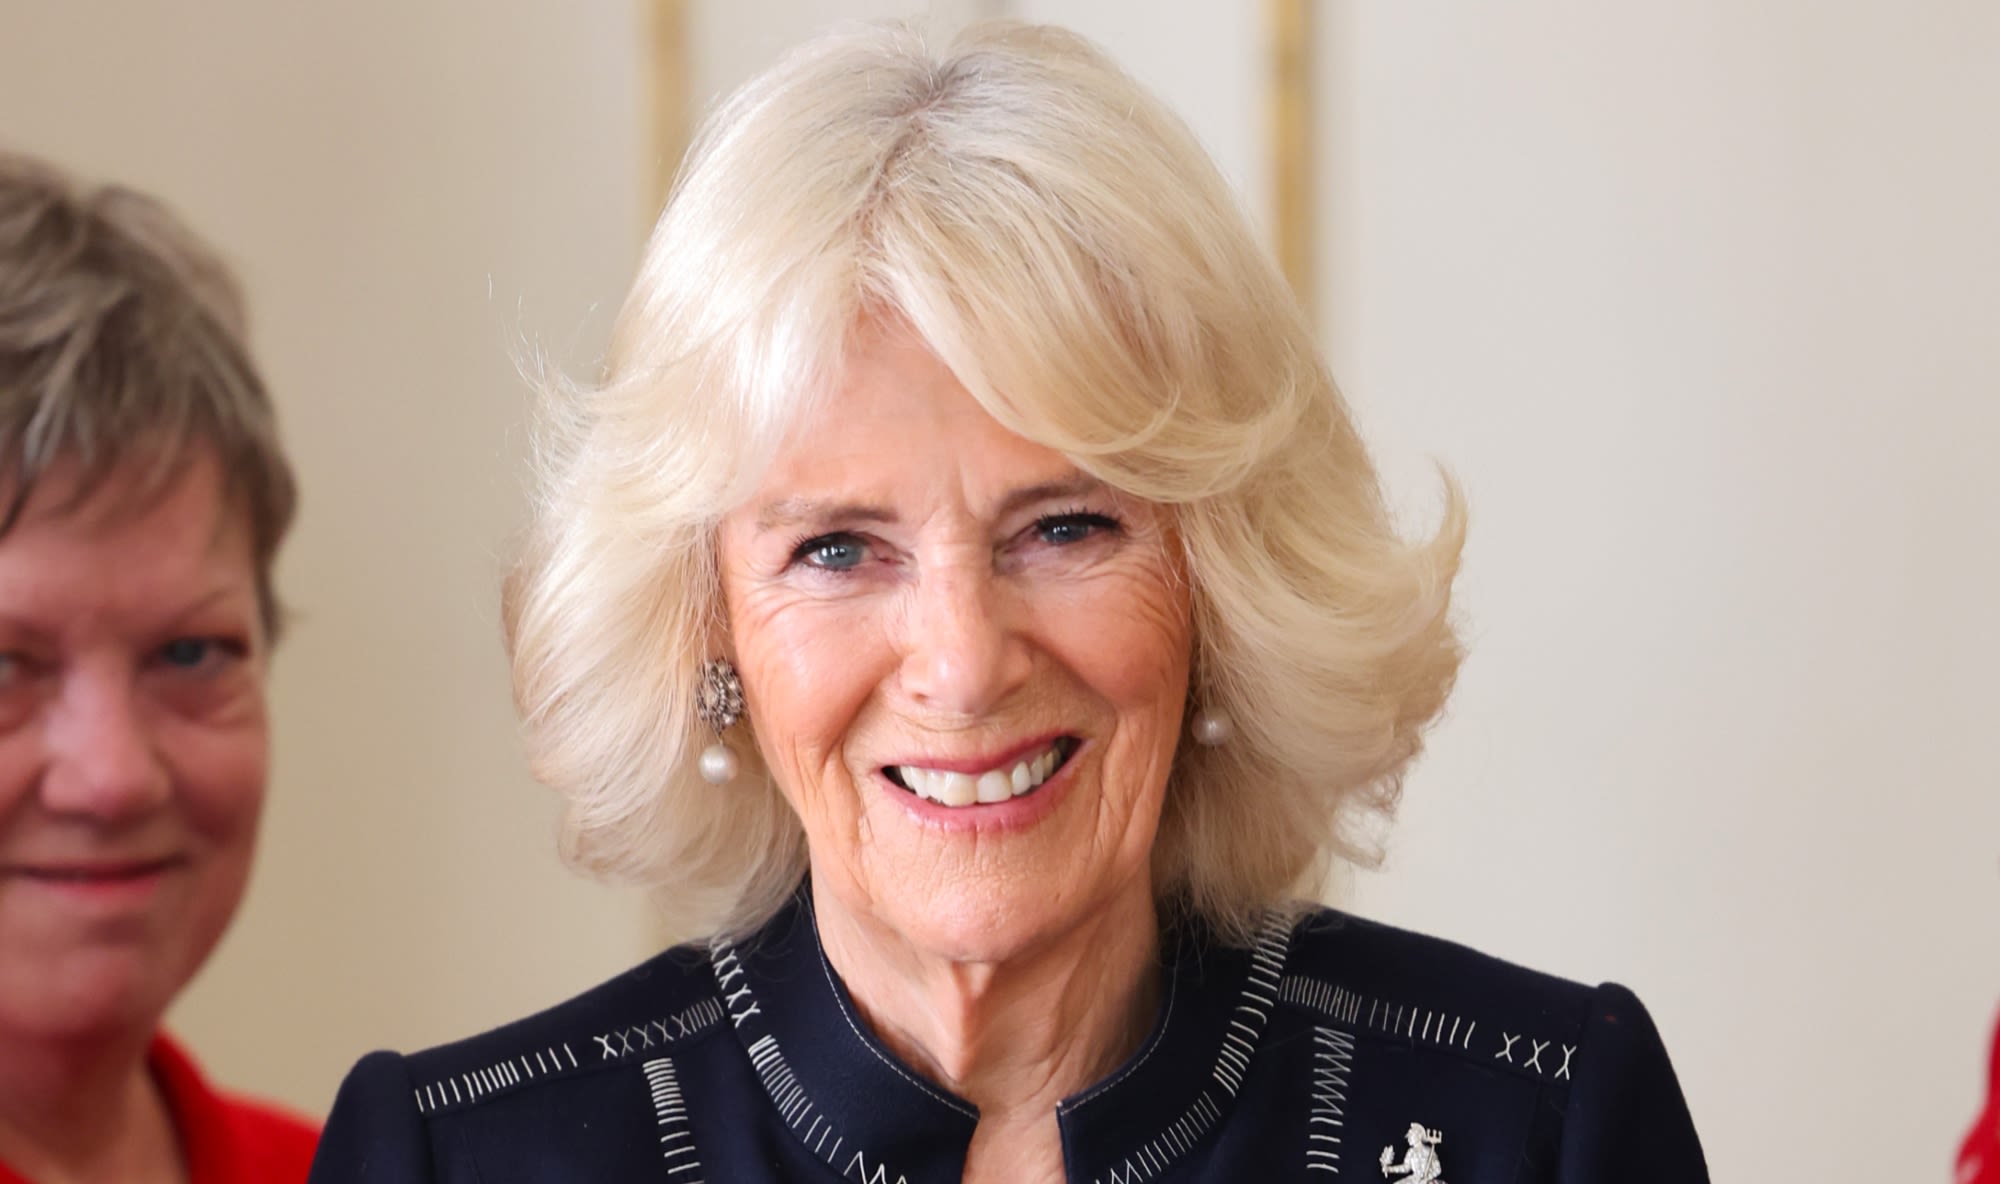 Queen Camilla Repurposes Anna Valentine Dress for Royal Hosting Engagement in London